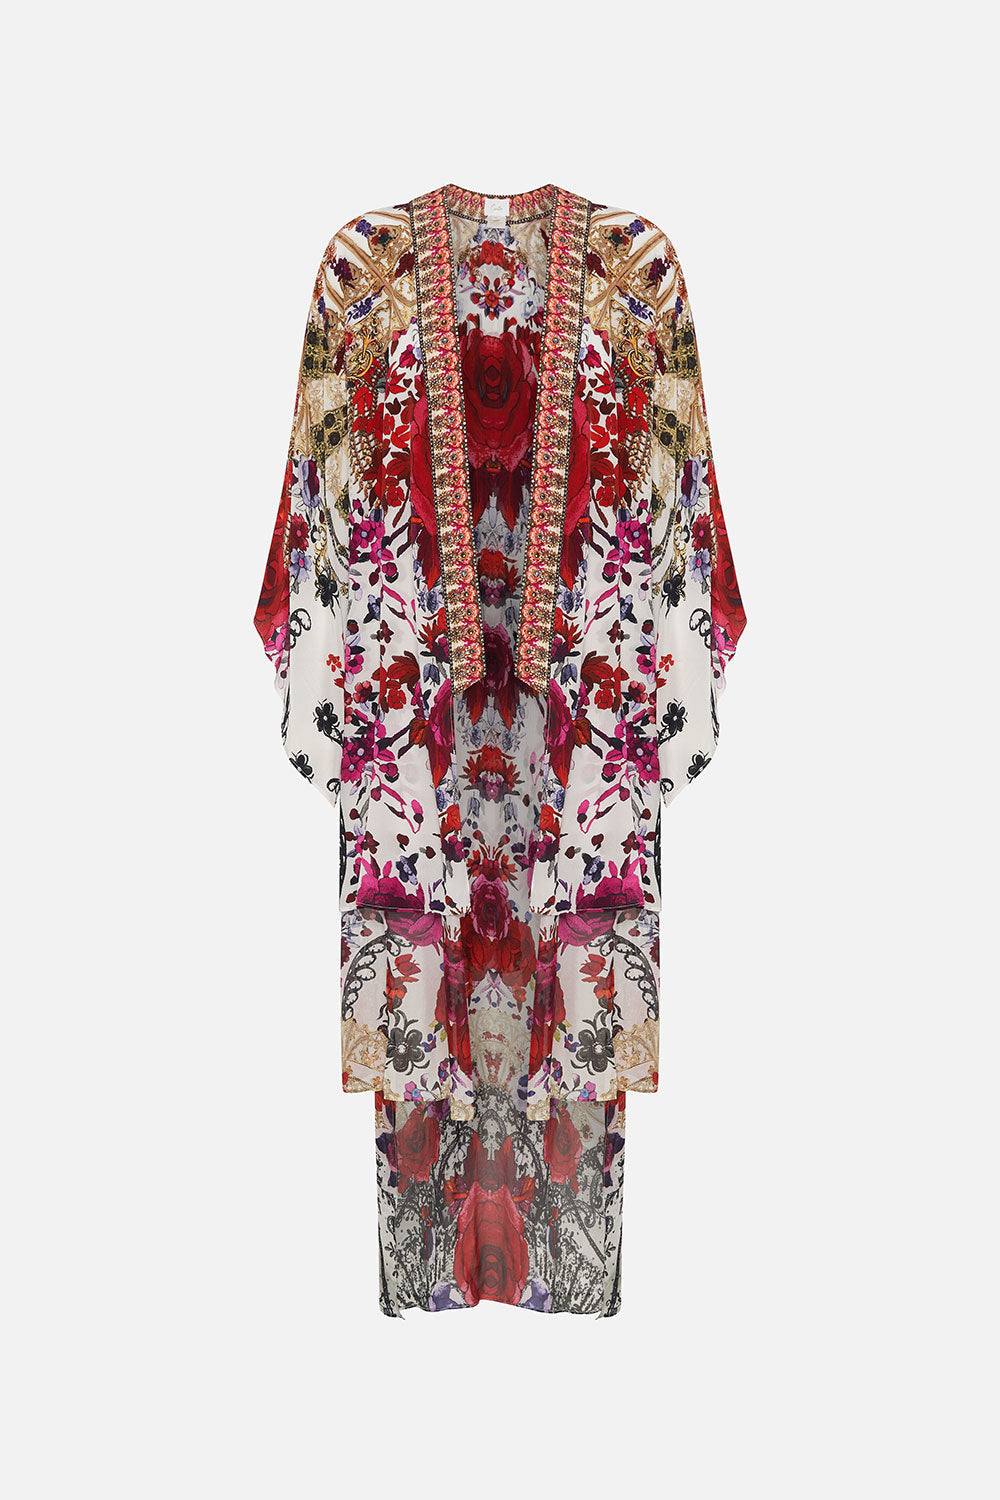 KIMONO WITH LONG UNDERLAYER REIGN OF ROSES